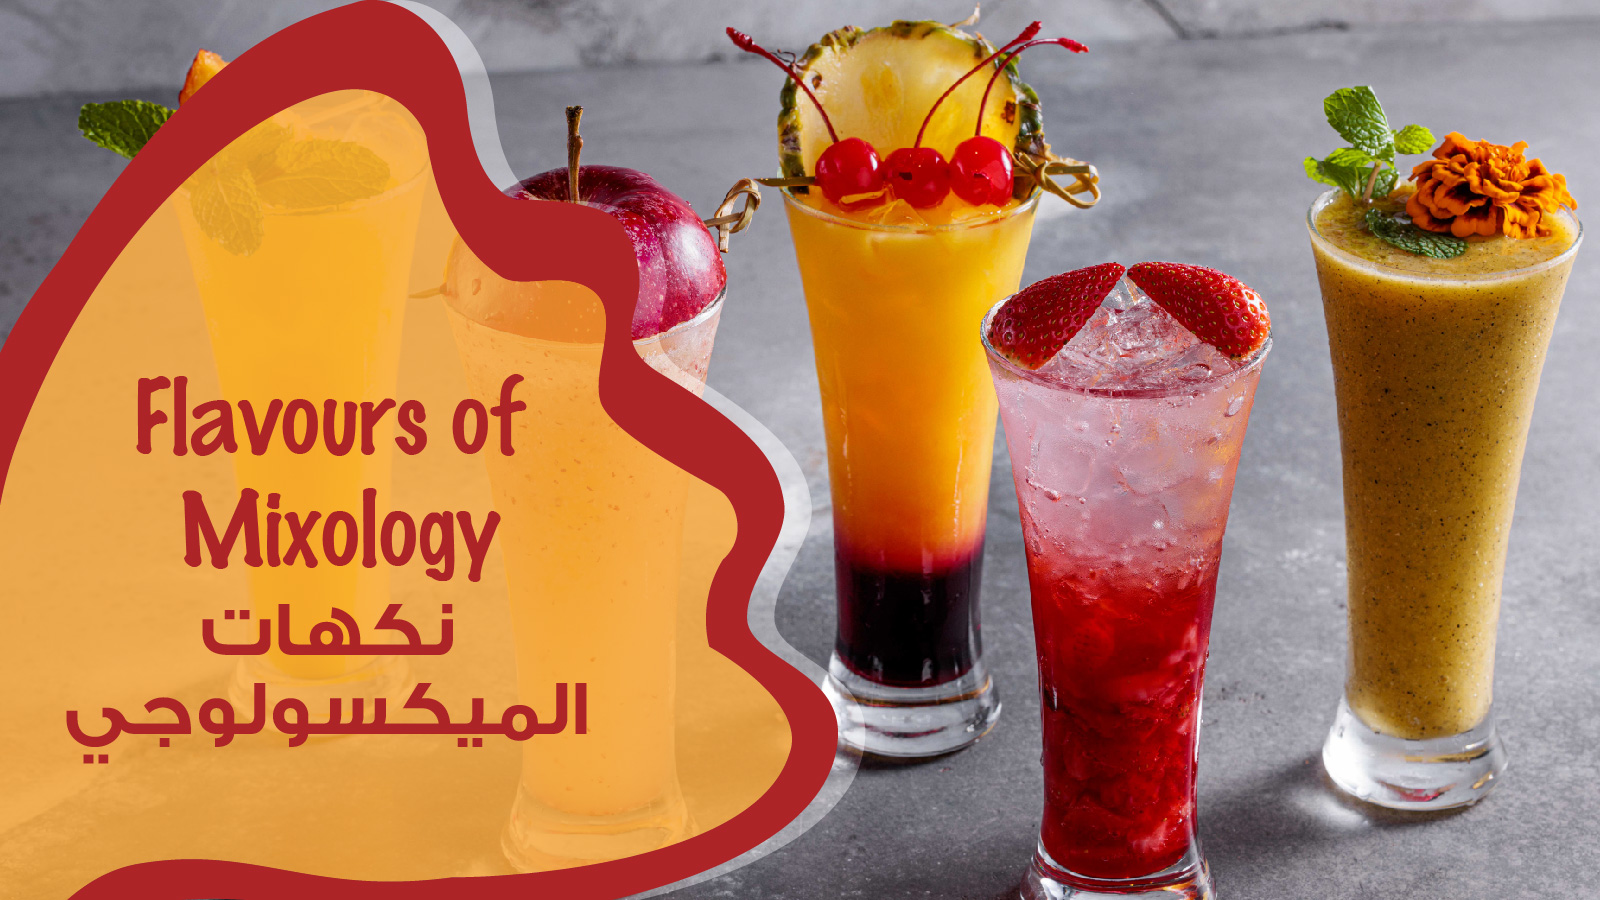 Flavours of Mixology